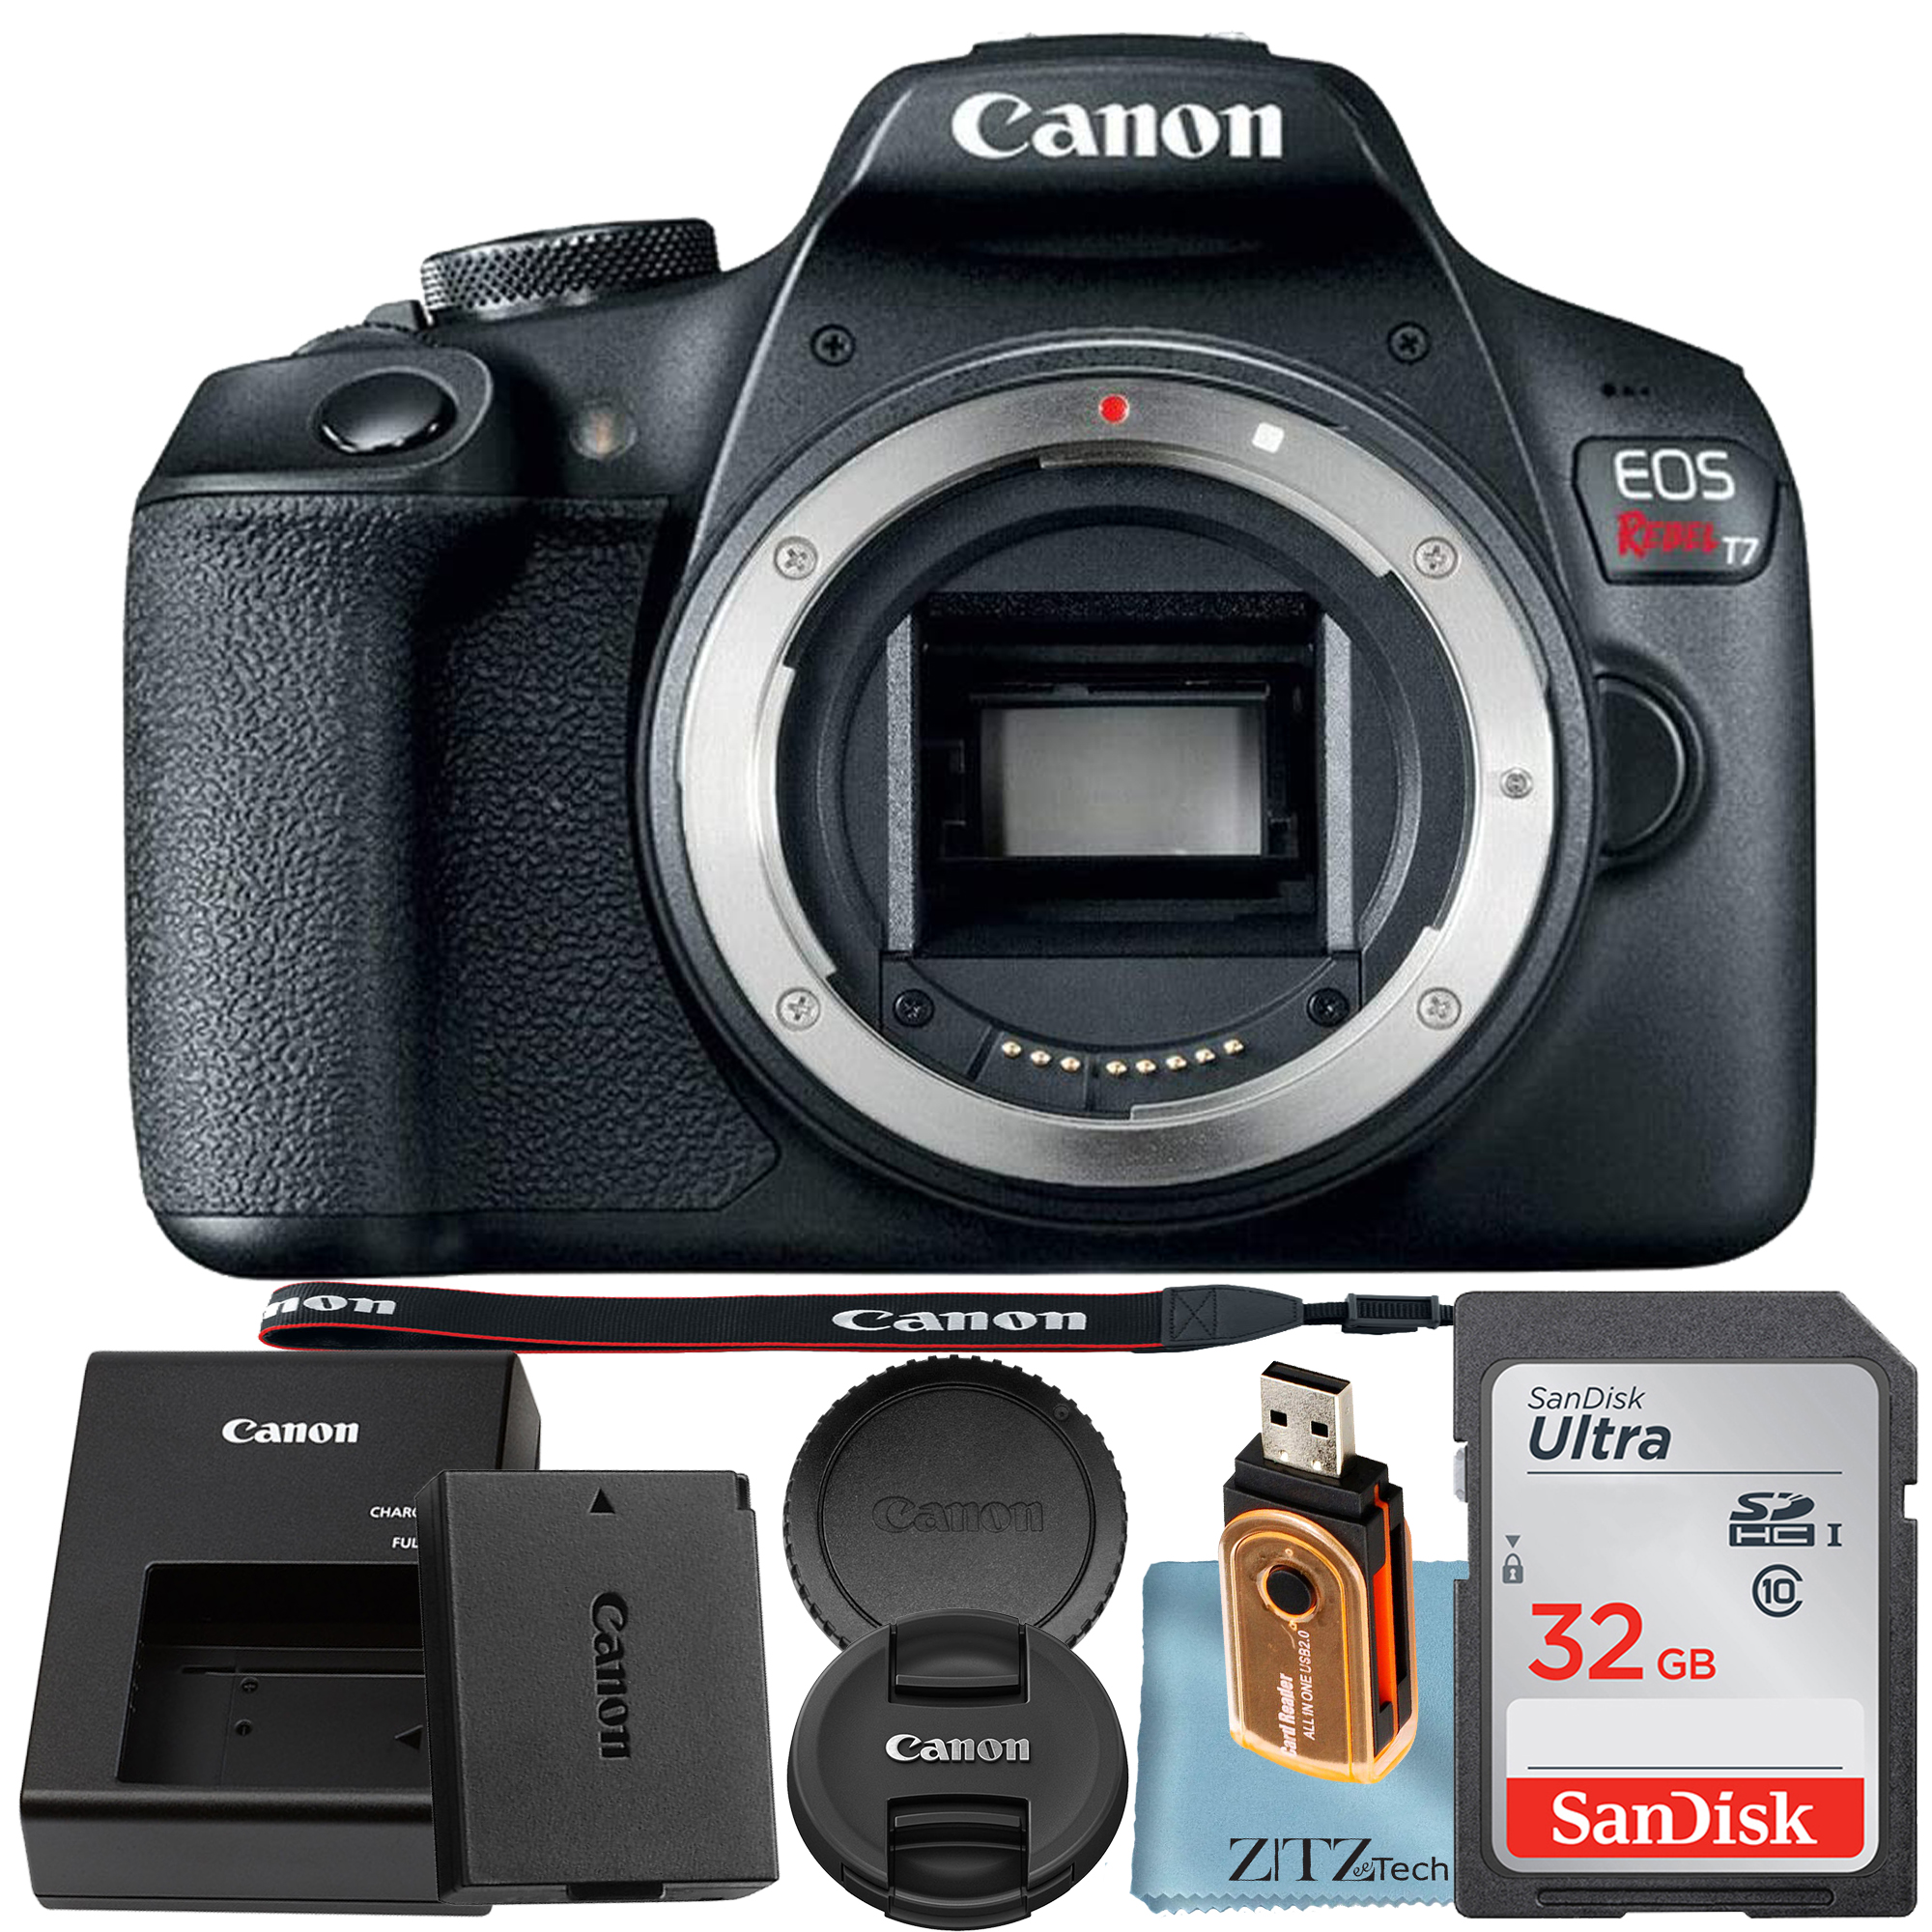 Canon EOS Rebel T7 DSLR Camera (Body Only) 24.1MP CMOS Sensor with SanDisk 32GB Memory Card + ZeeTech Accessory Bundle